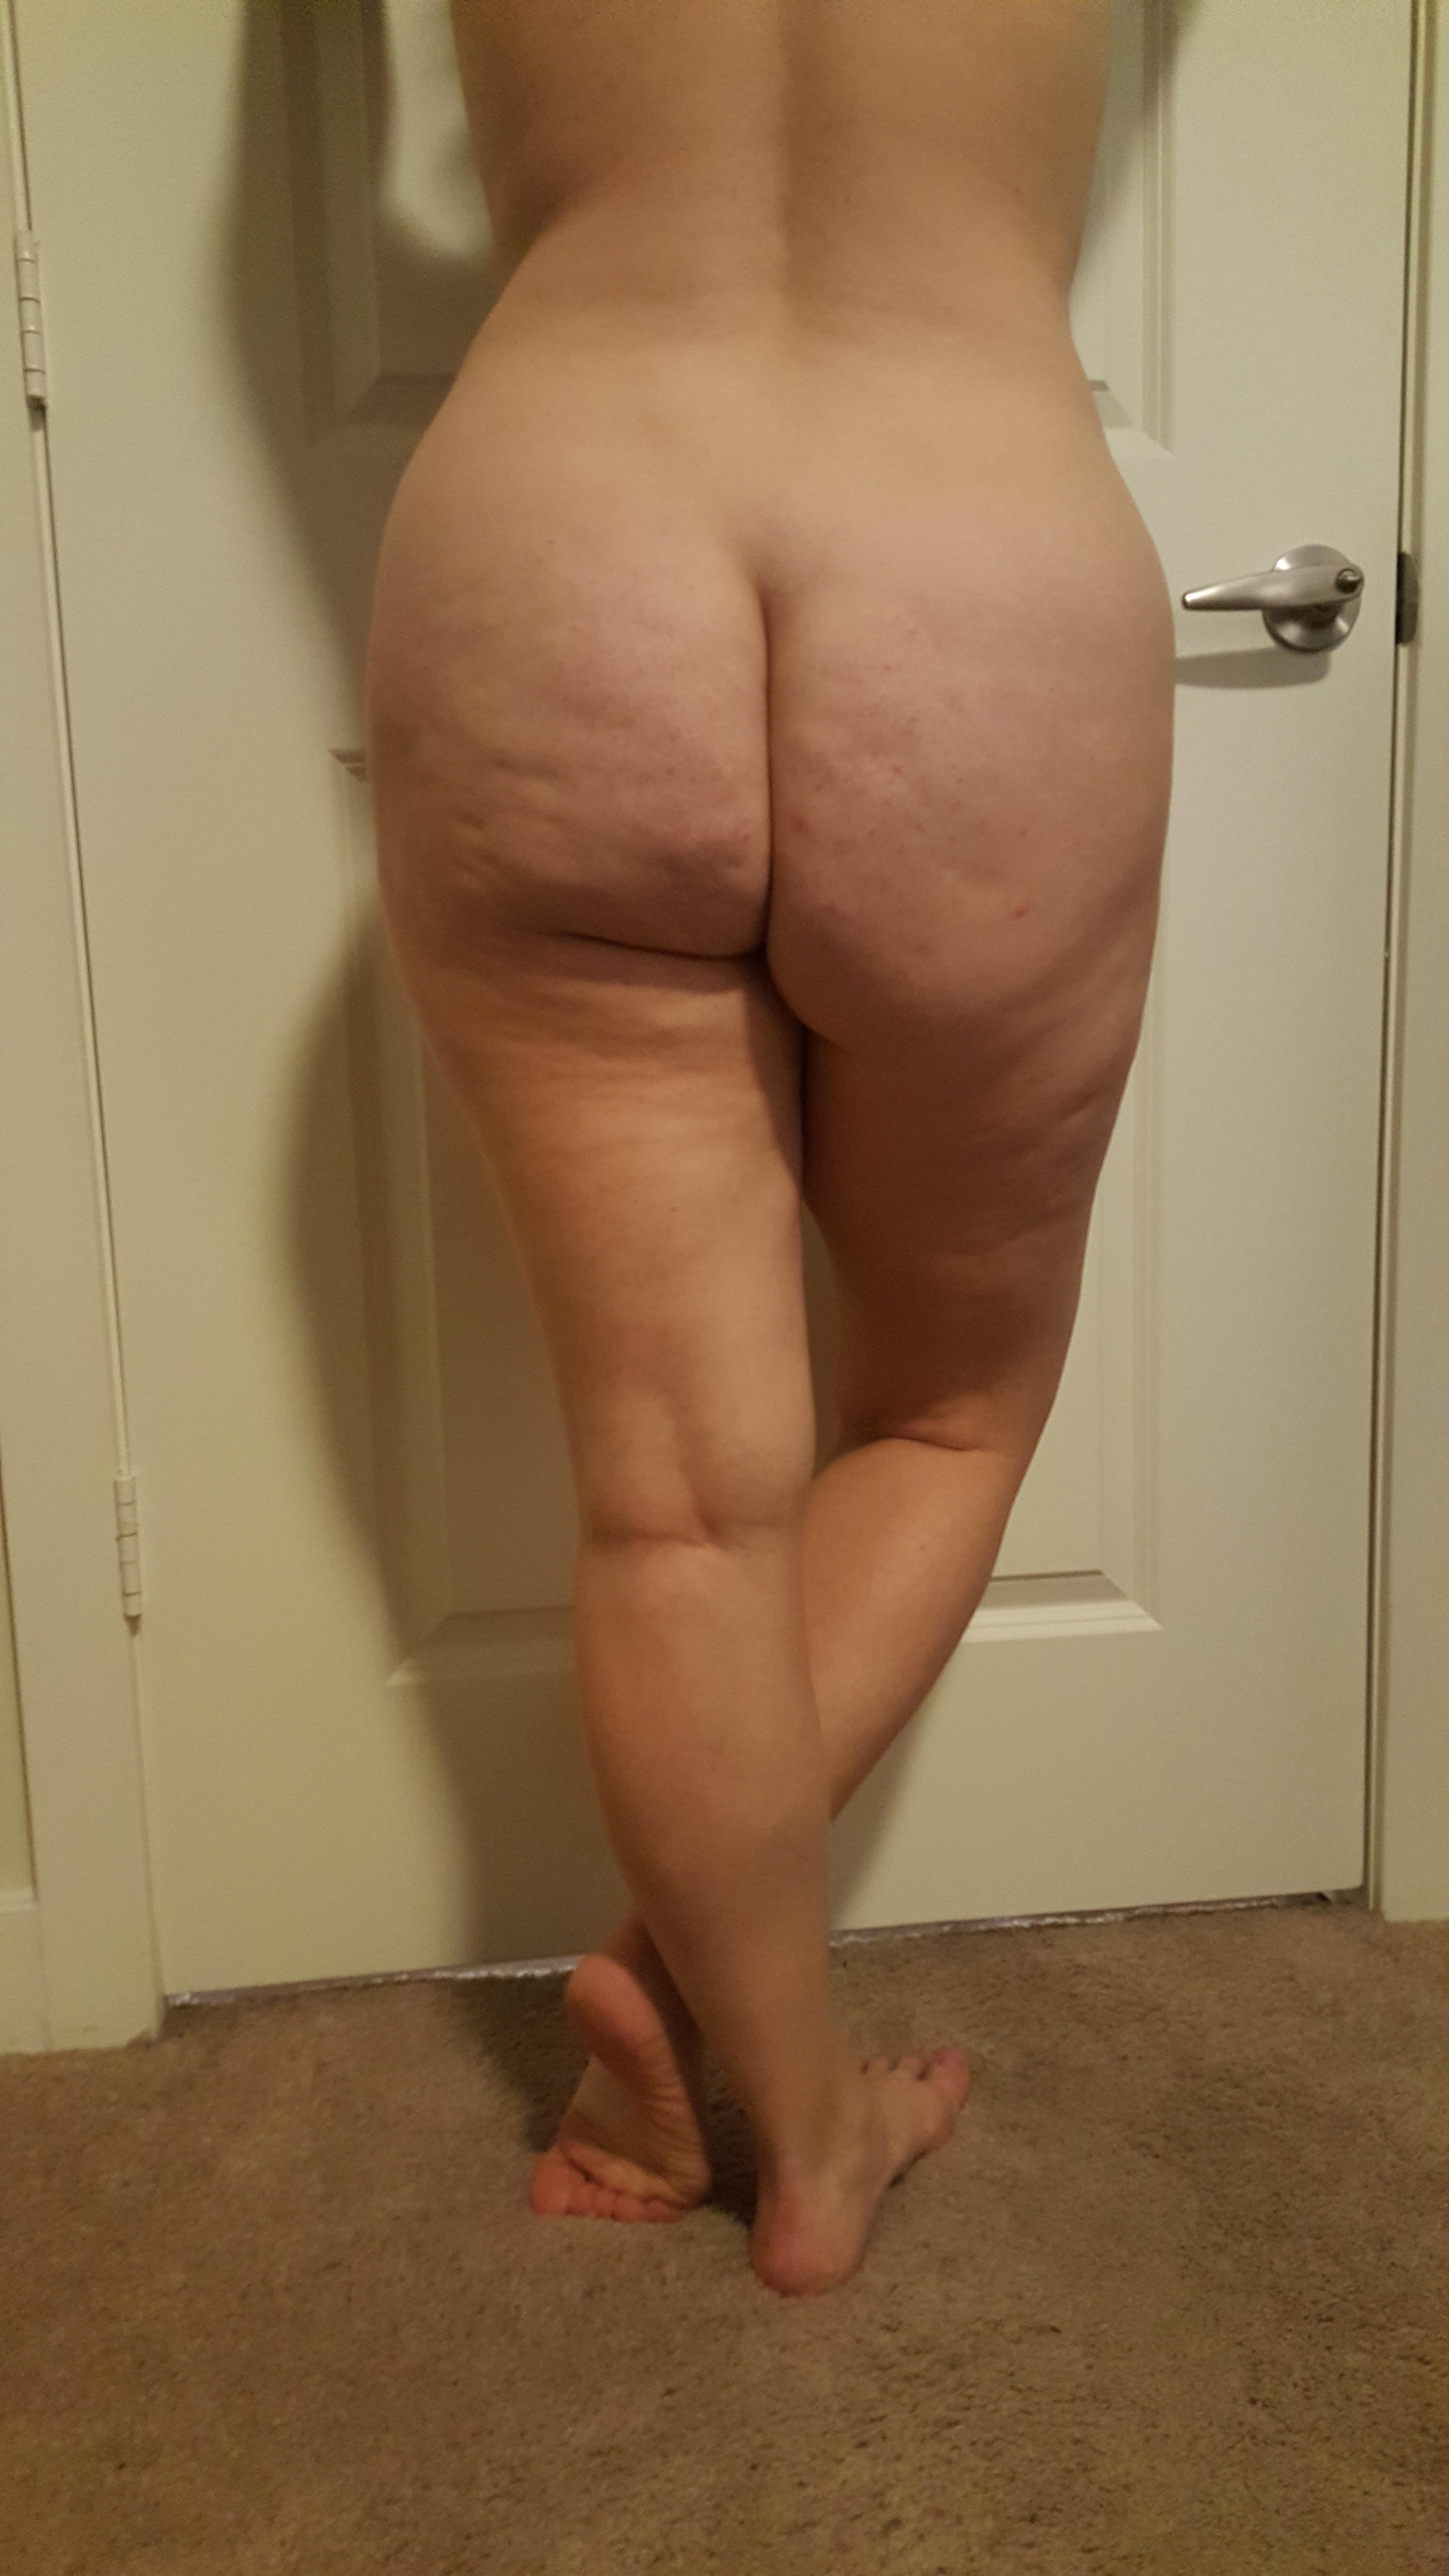 Wife S Big Booty Porn Pic Eporner